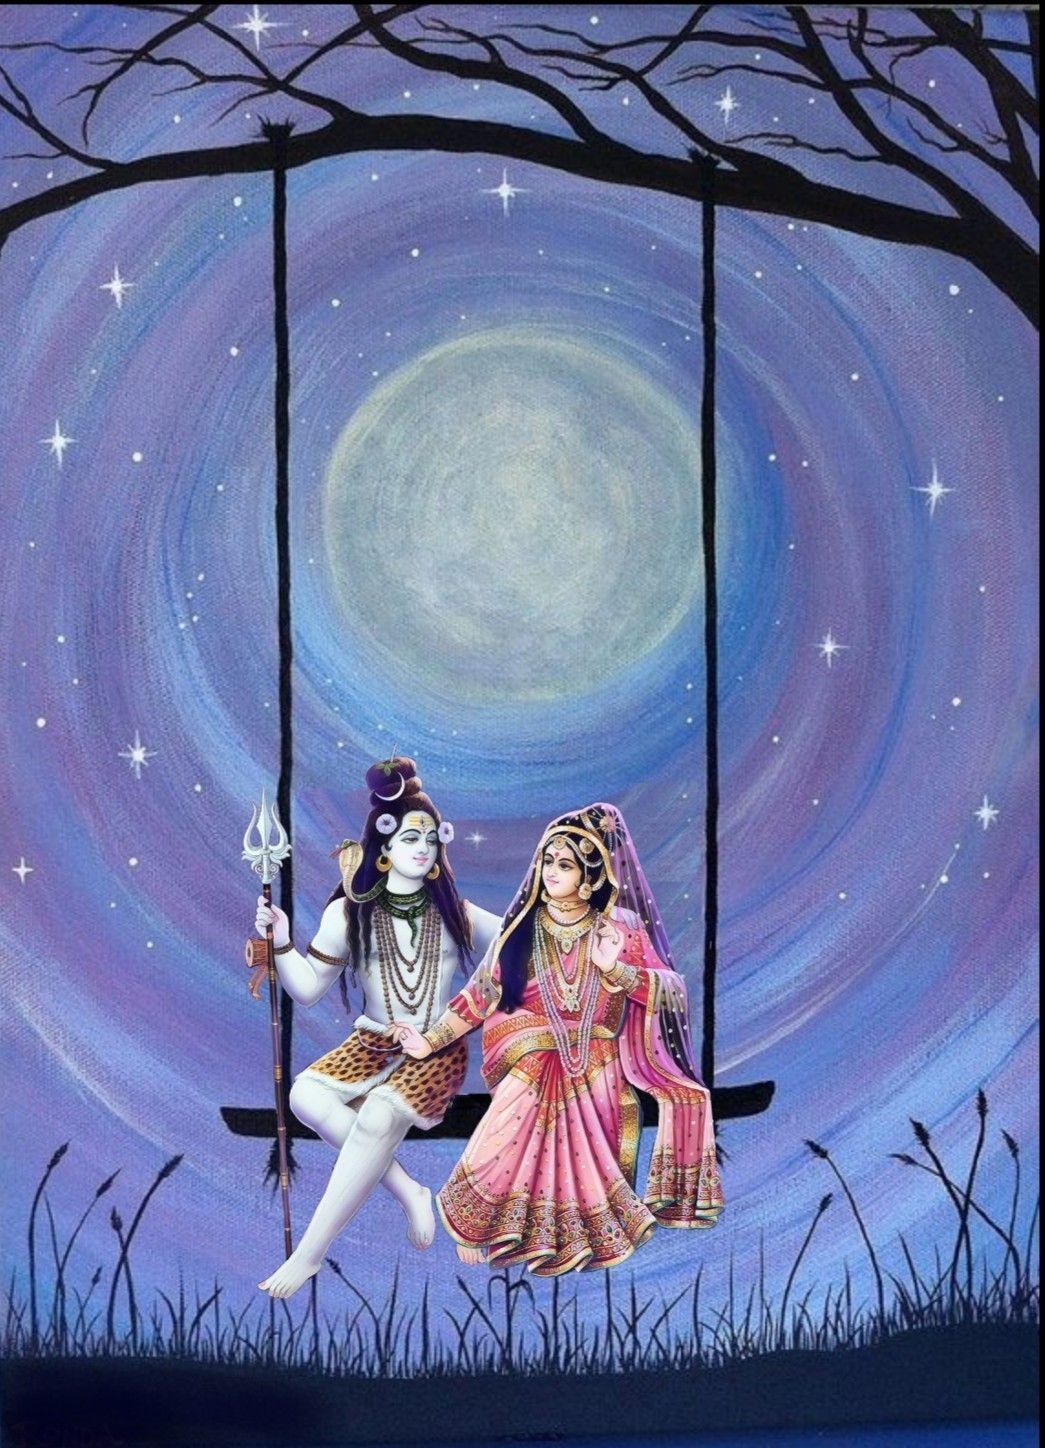 Lord Shiva and Parvati having a swing in creative art painting. Lord shiva painting, Shiva parvati image, Lord shiva